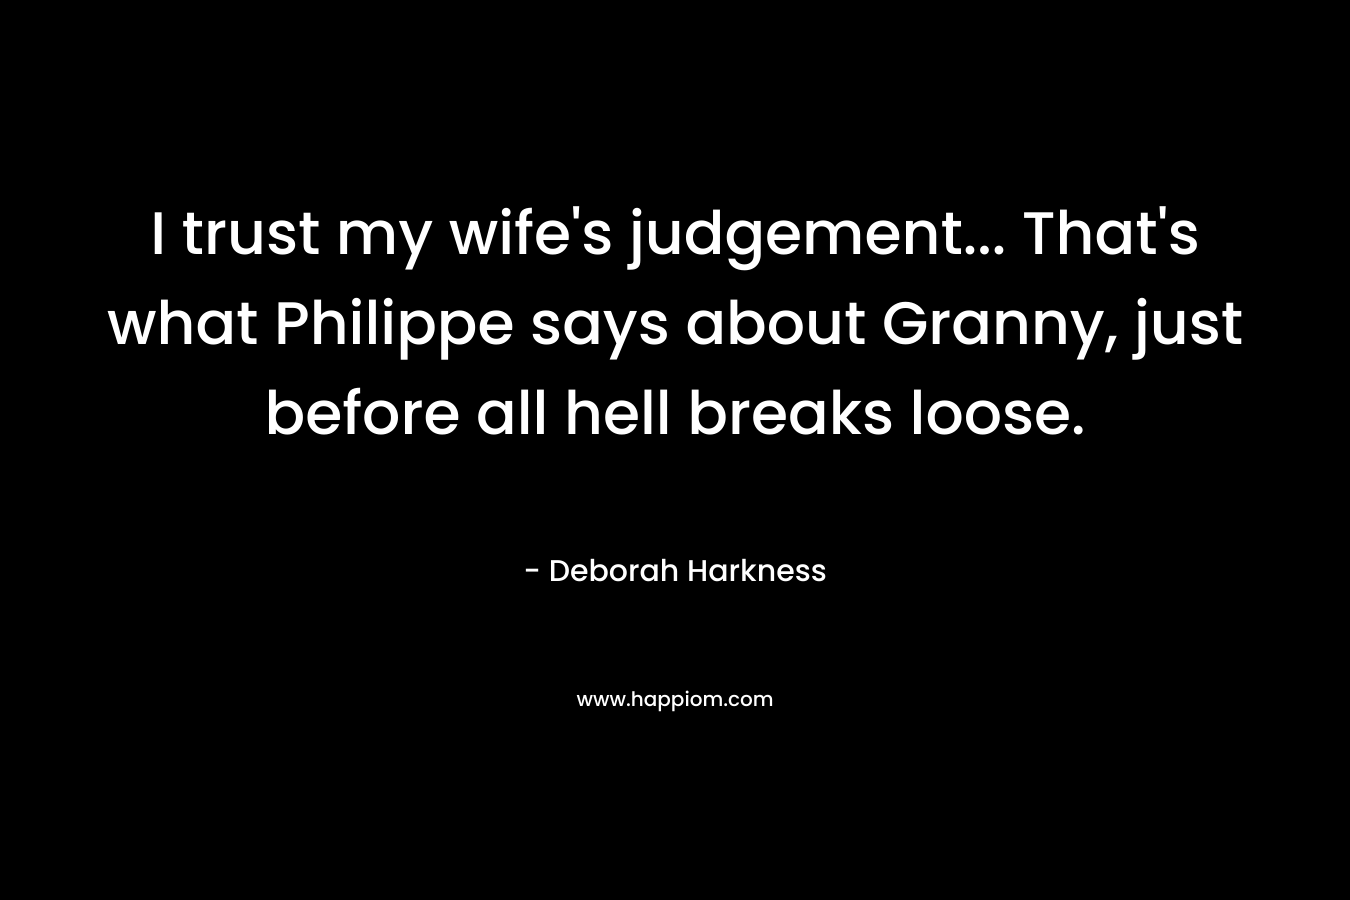 I trust my wife’s judgement… That’s what Philippe says about Granny, just before all hell breaks loose. – Deborah Harkness